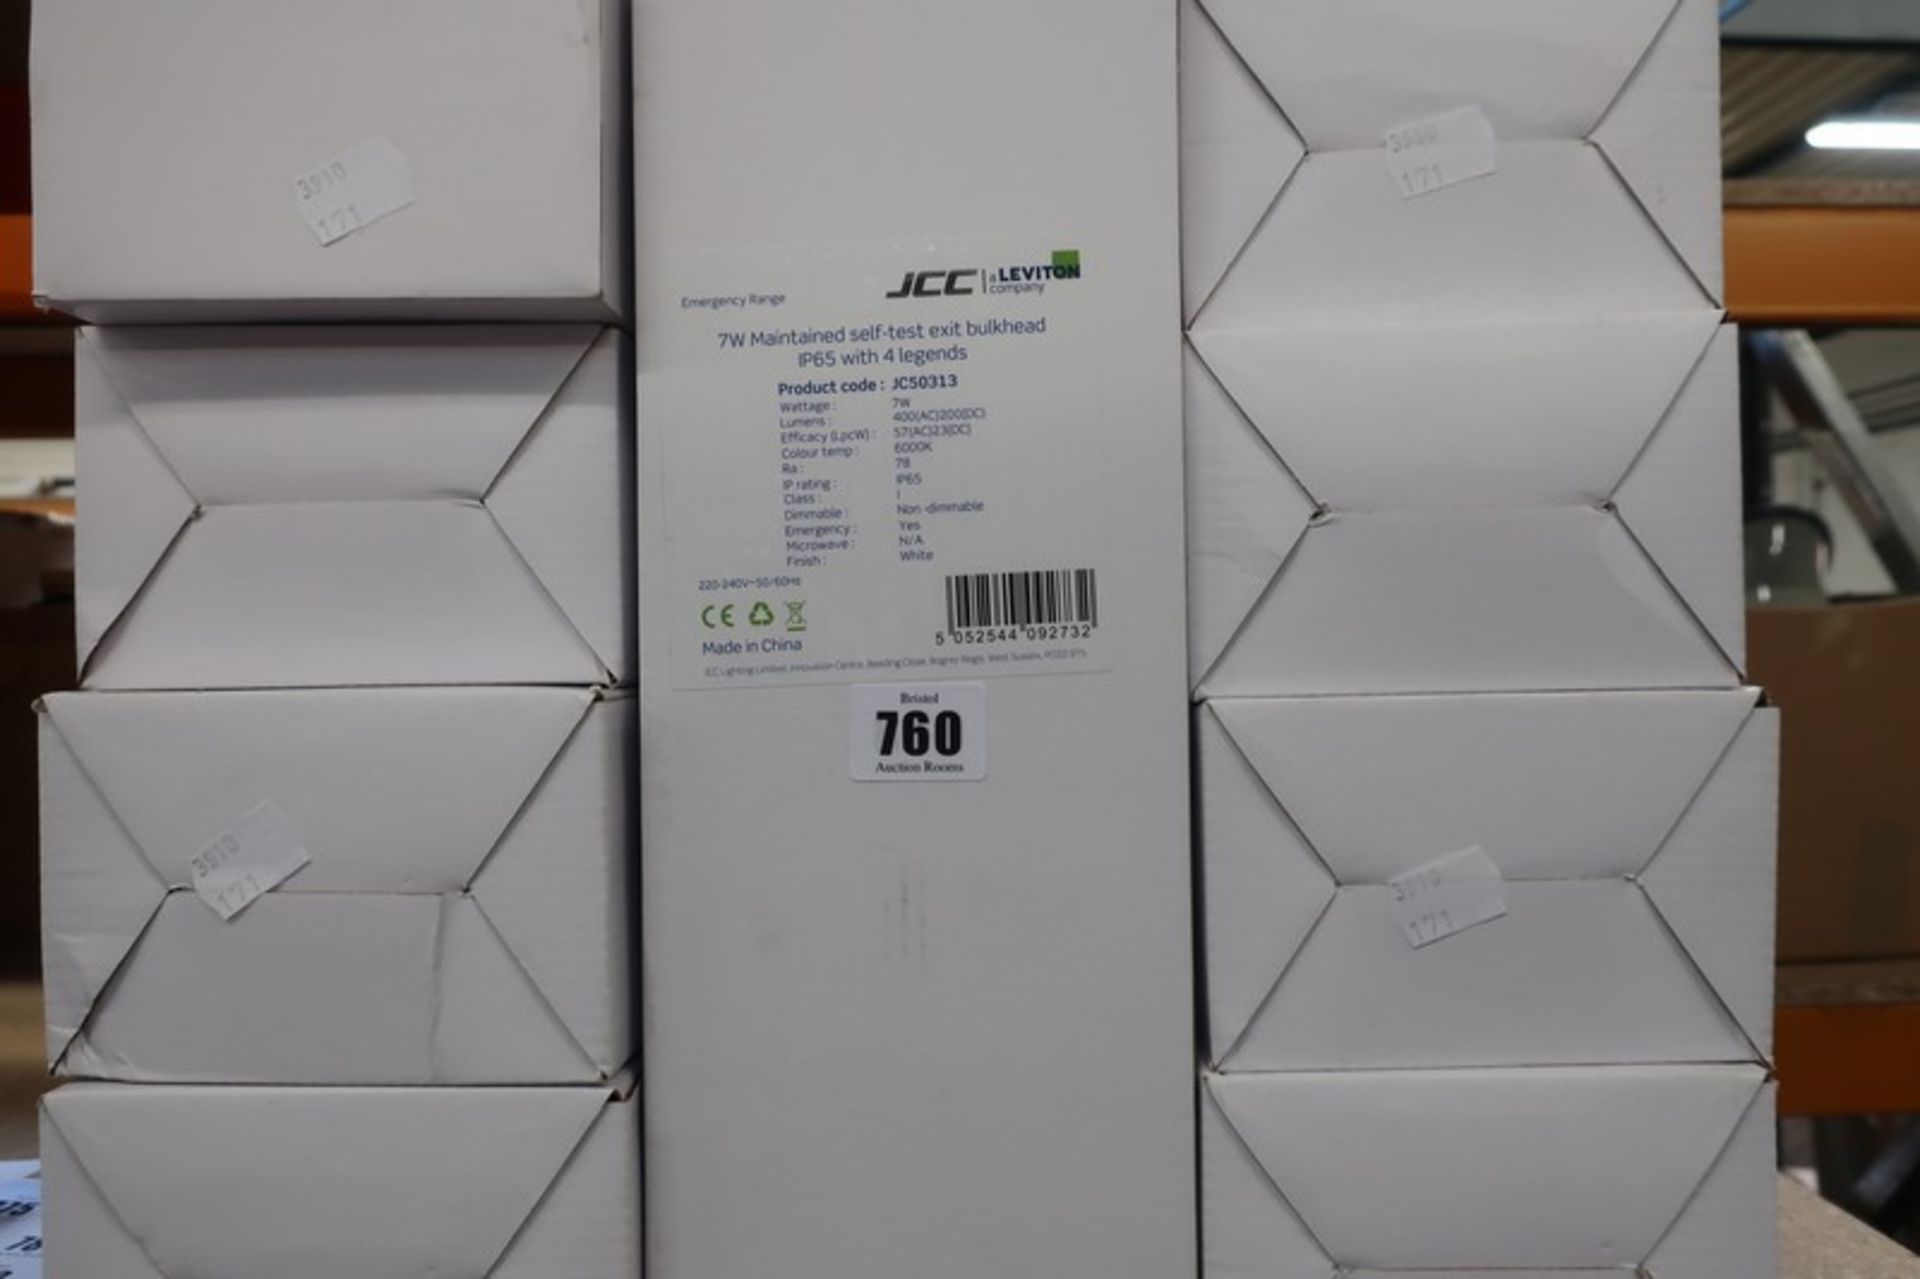 Twelve boxed as new JCC 7W maintained self-test EXIT bulkheads (IP65 with 4 legends).